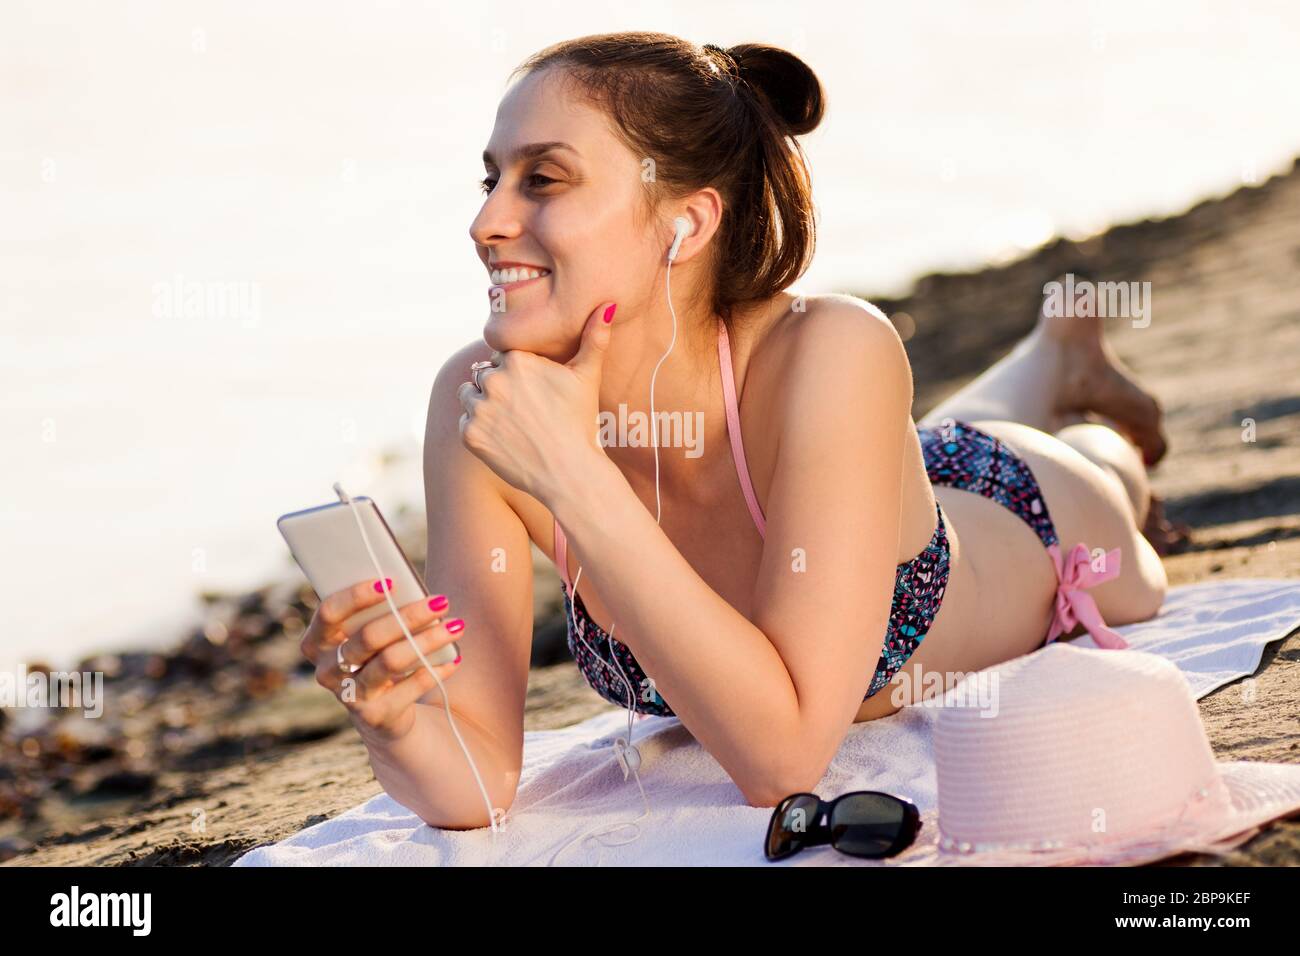 Attractive smiling woman with earphones in bikini is lying down, sunbathing and listening music from mobile phone at summer. Stock Photo